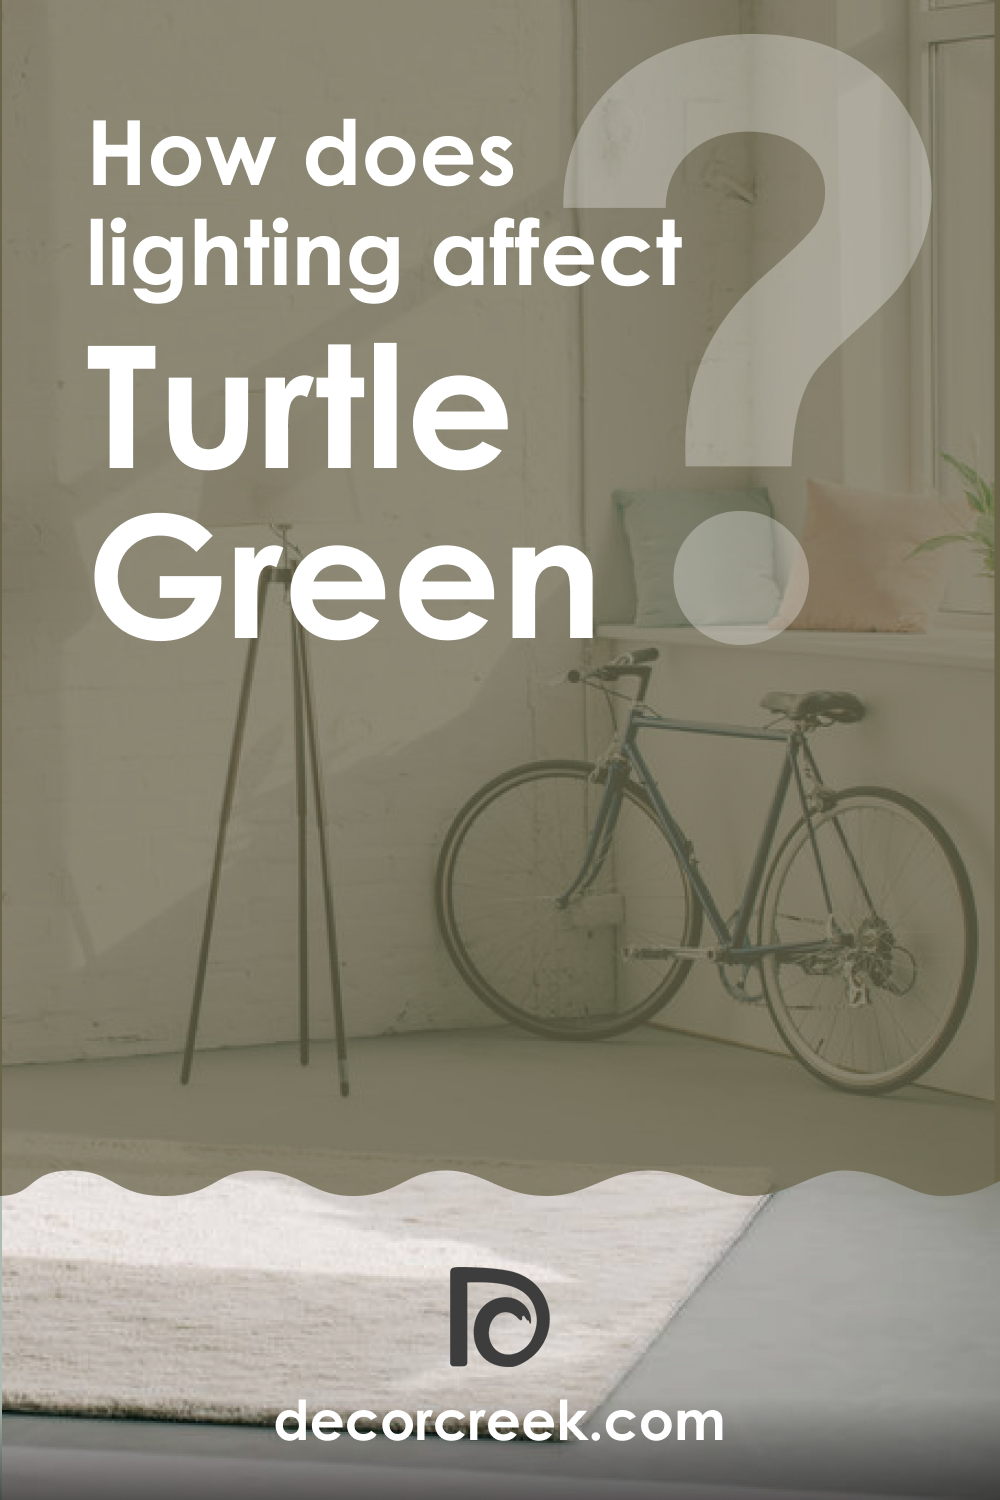 How Does Lighting Affect Turtle Green 2142-20?